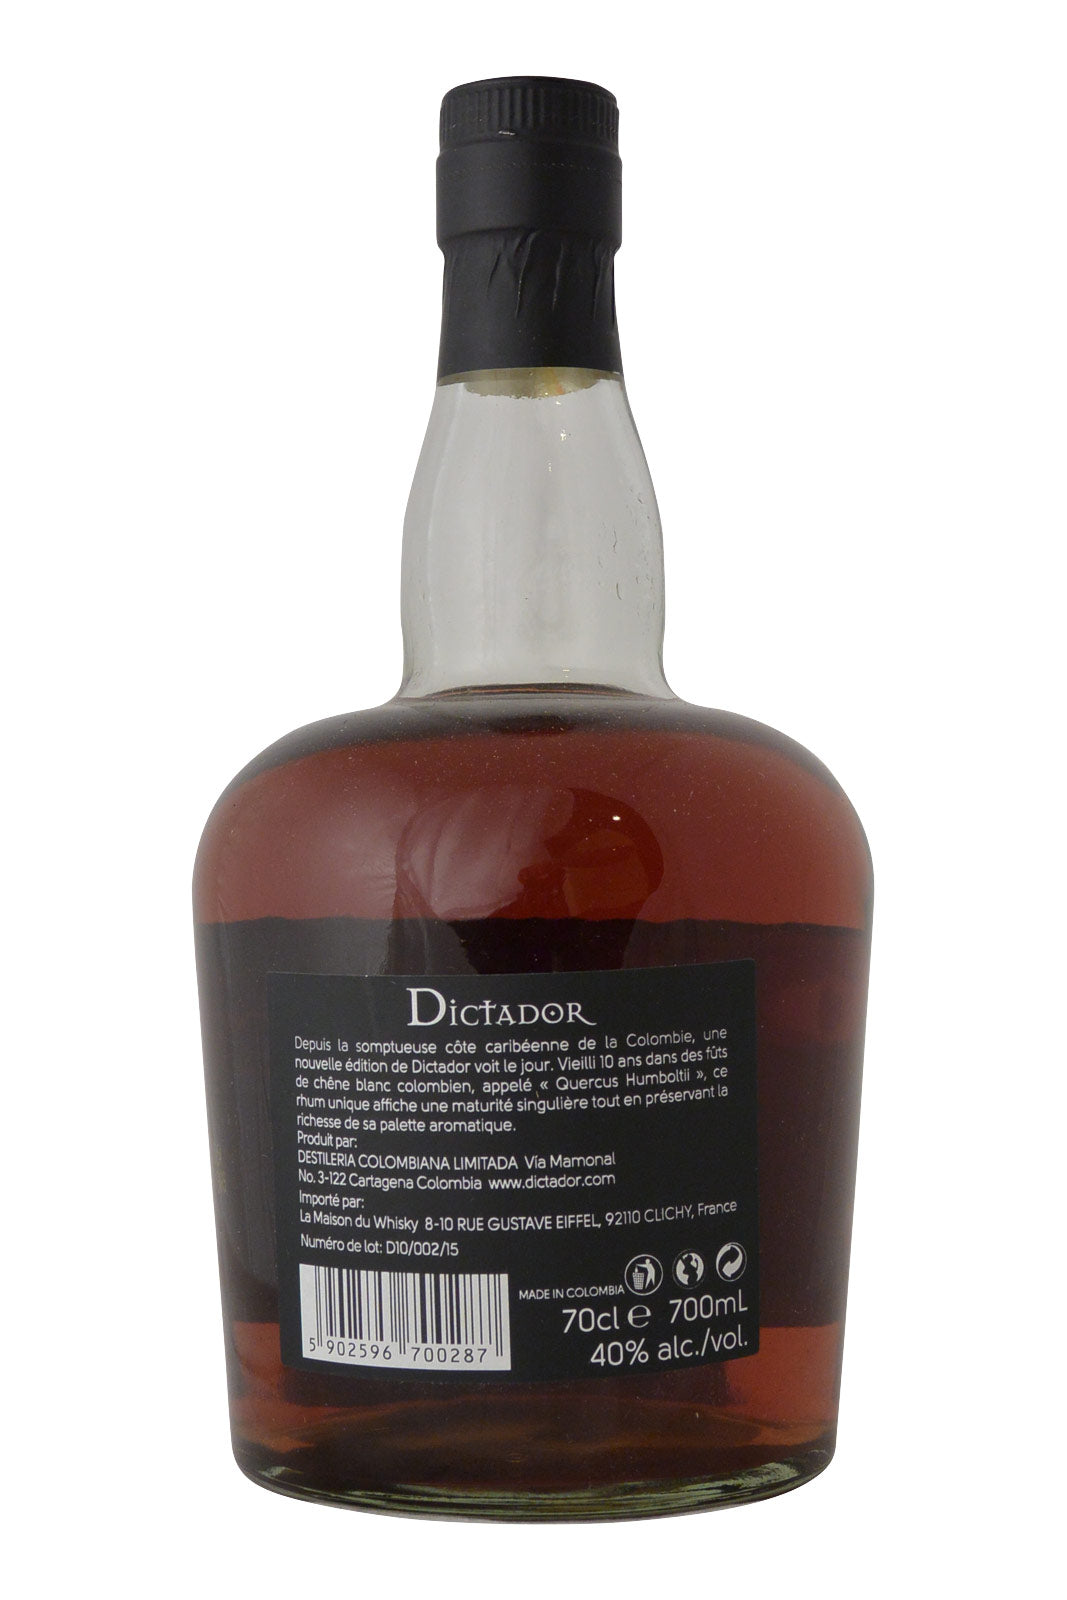 Dictador 10 Year Old